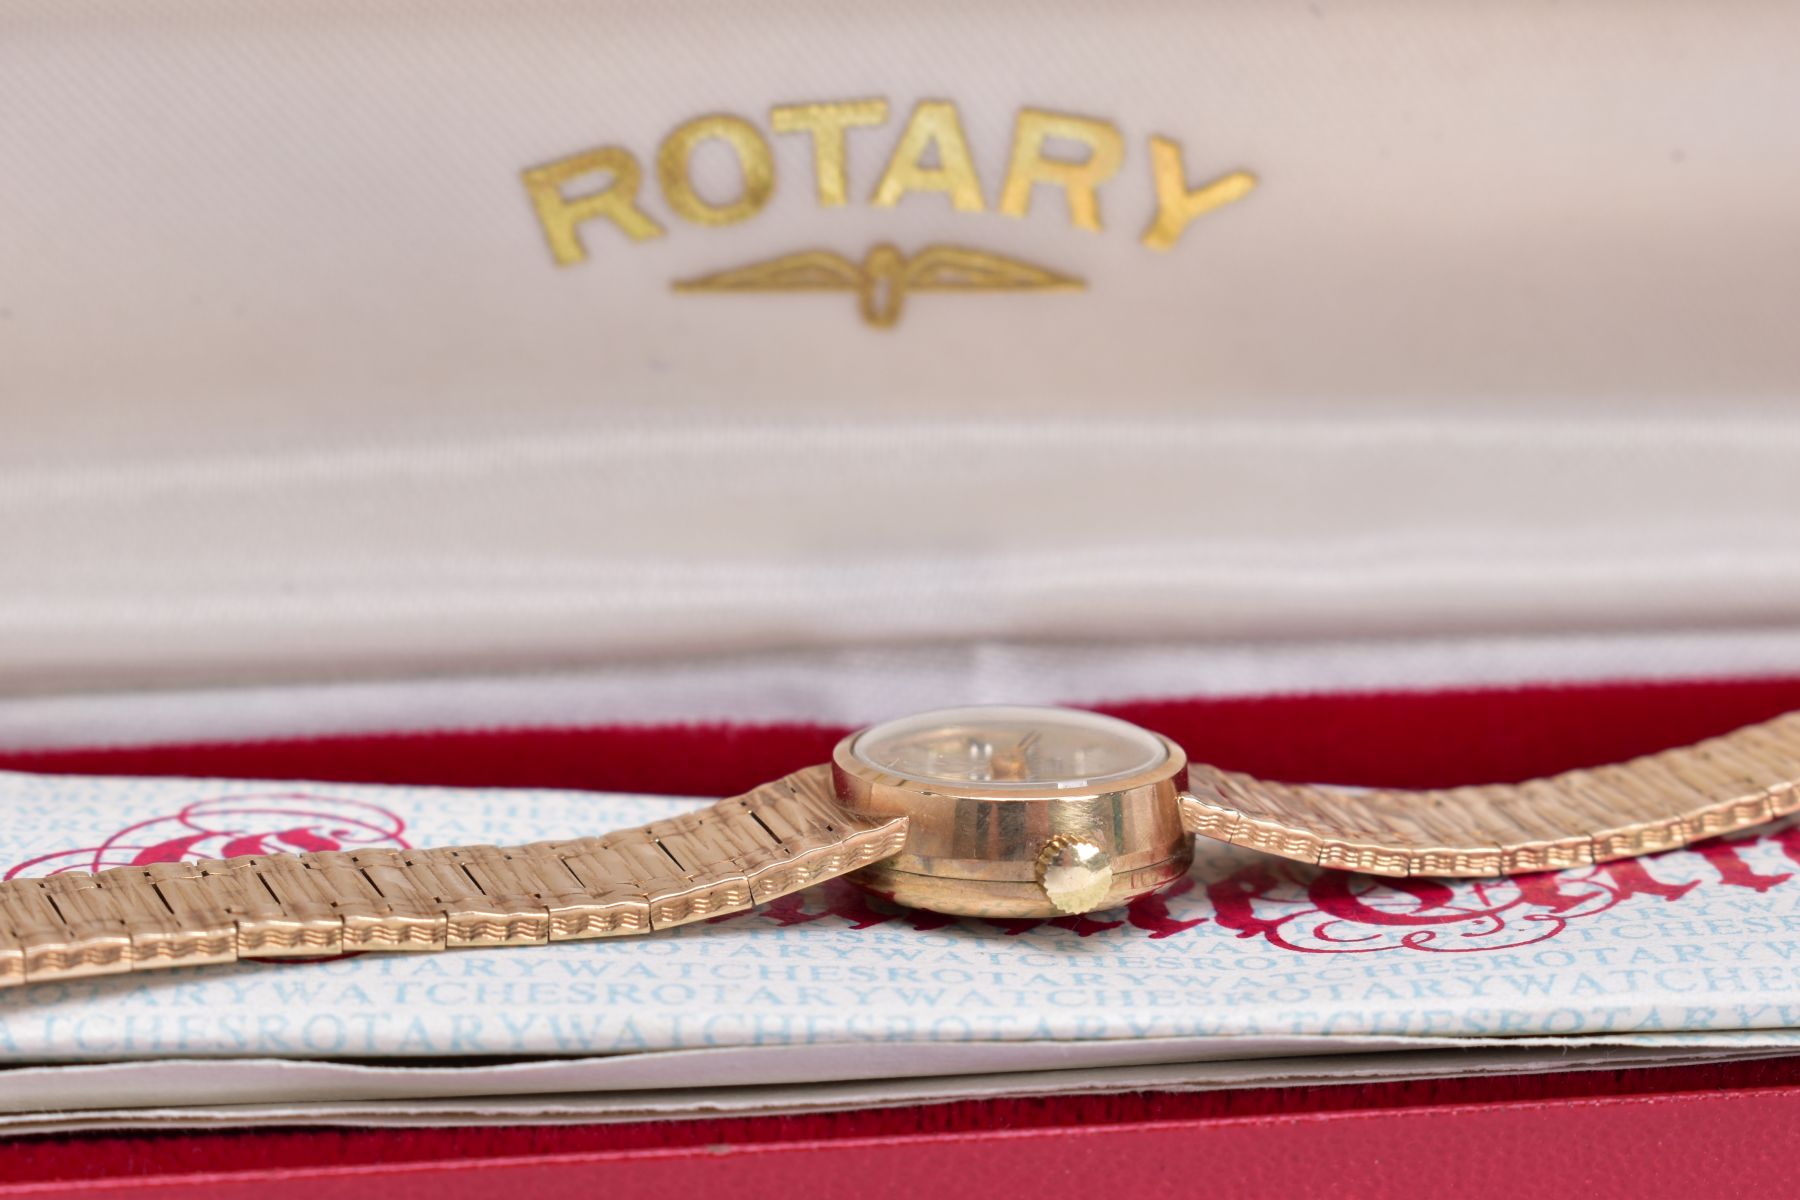 A MID TO LATE TWENTIETH CENTURY LADY'S ROTARY 9CT GOLD WATCH, a round case measuring approximately - Image 5 of 6